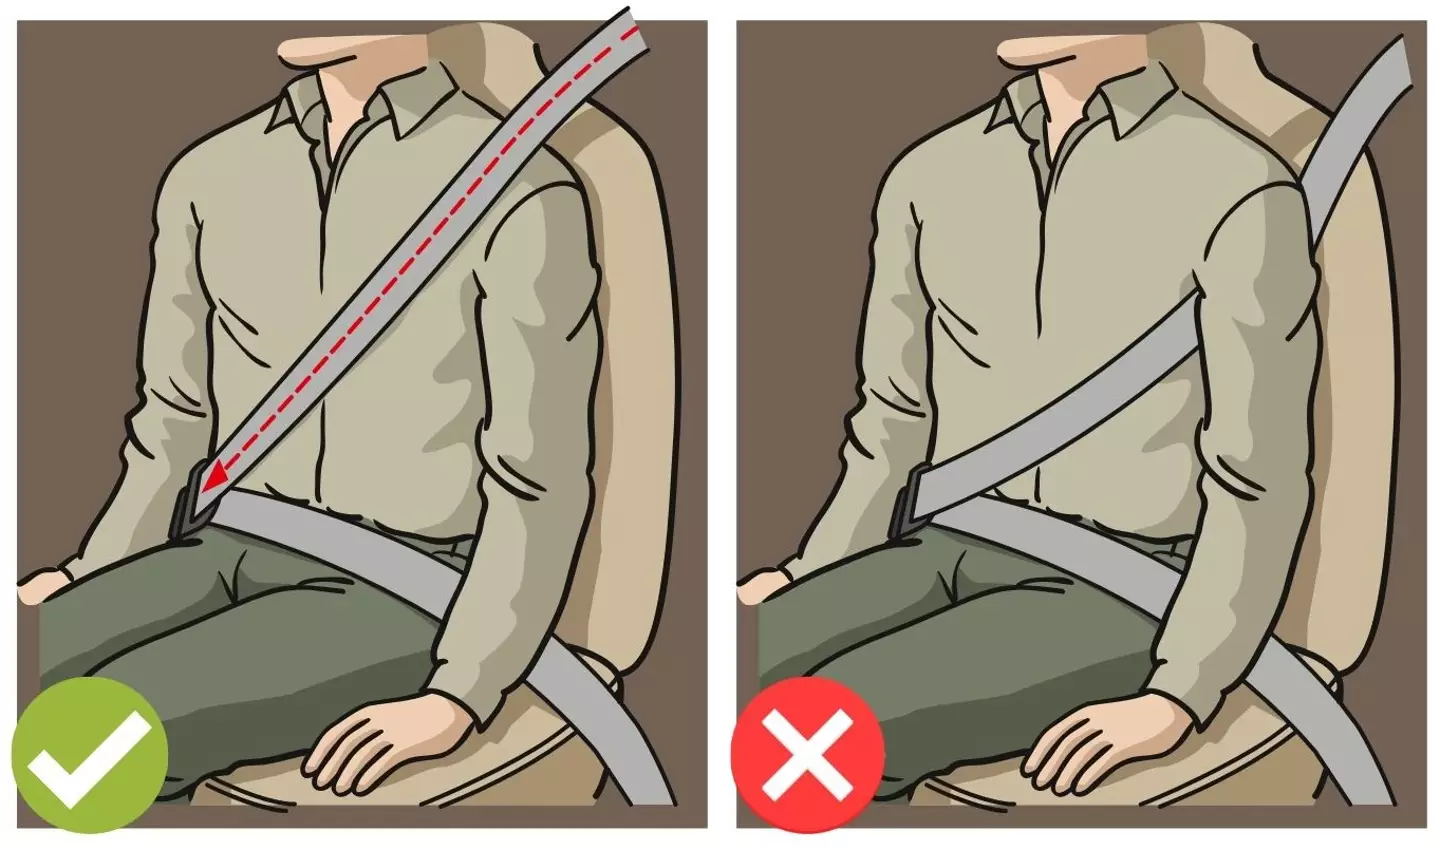 The correct way of wearing a seatbelt, according to Queensland Government.